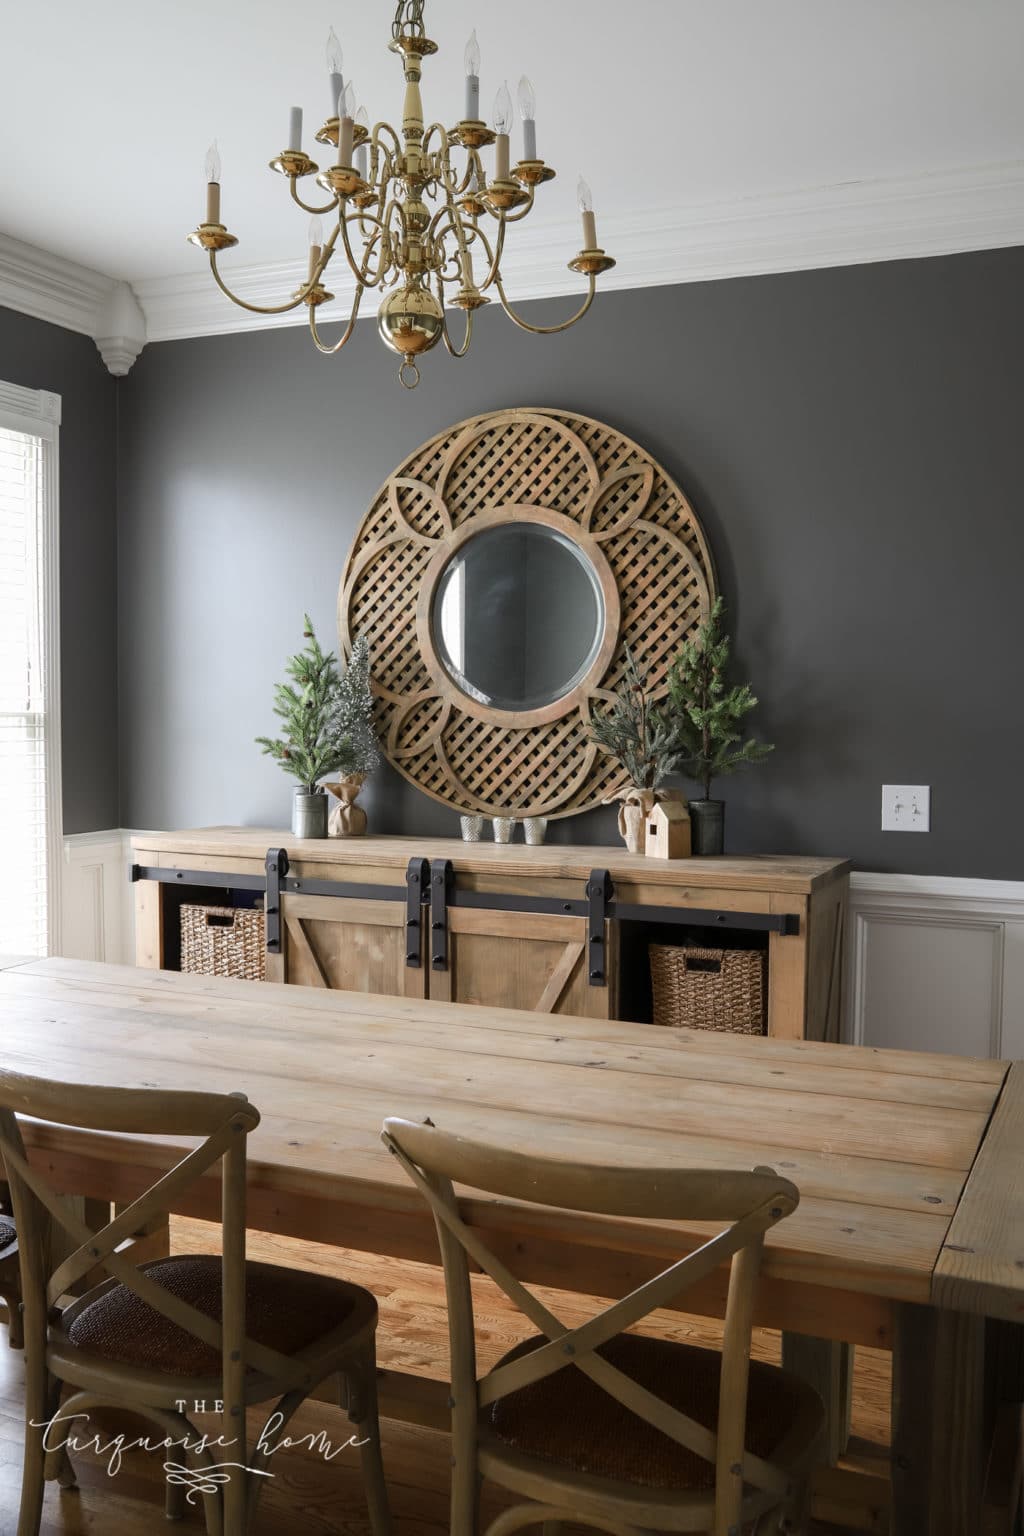 Charcoal Painted Walls in my Dining Room